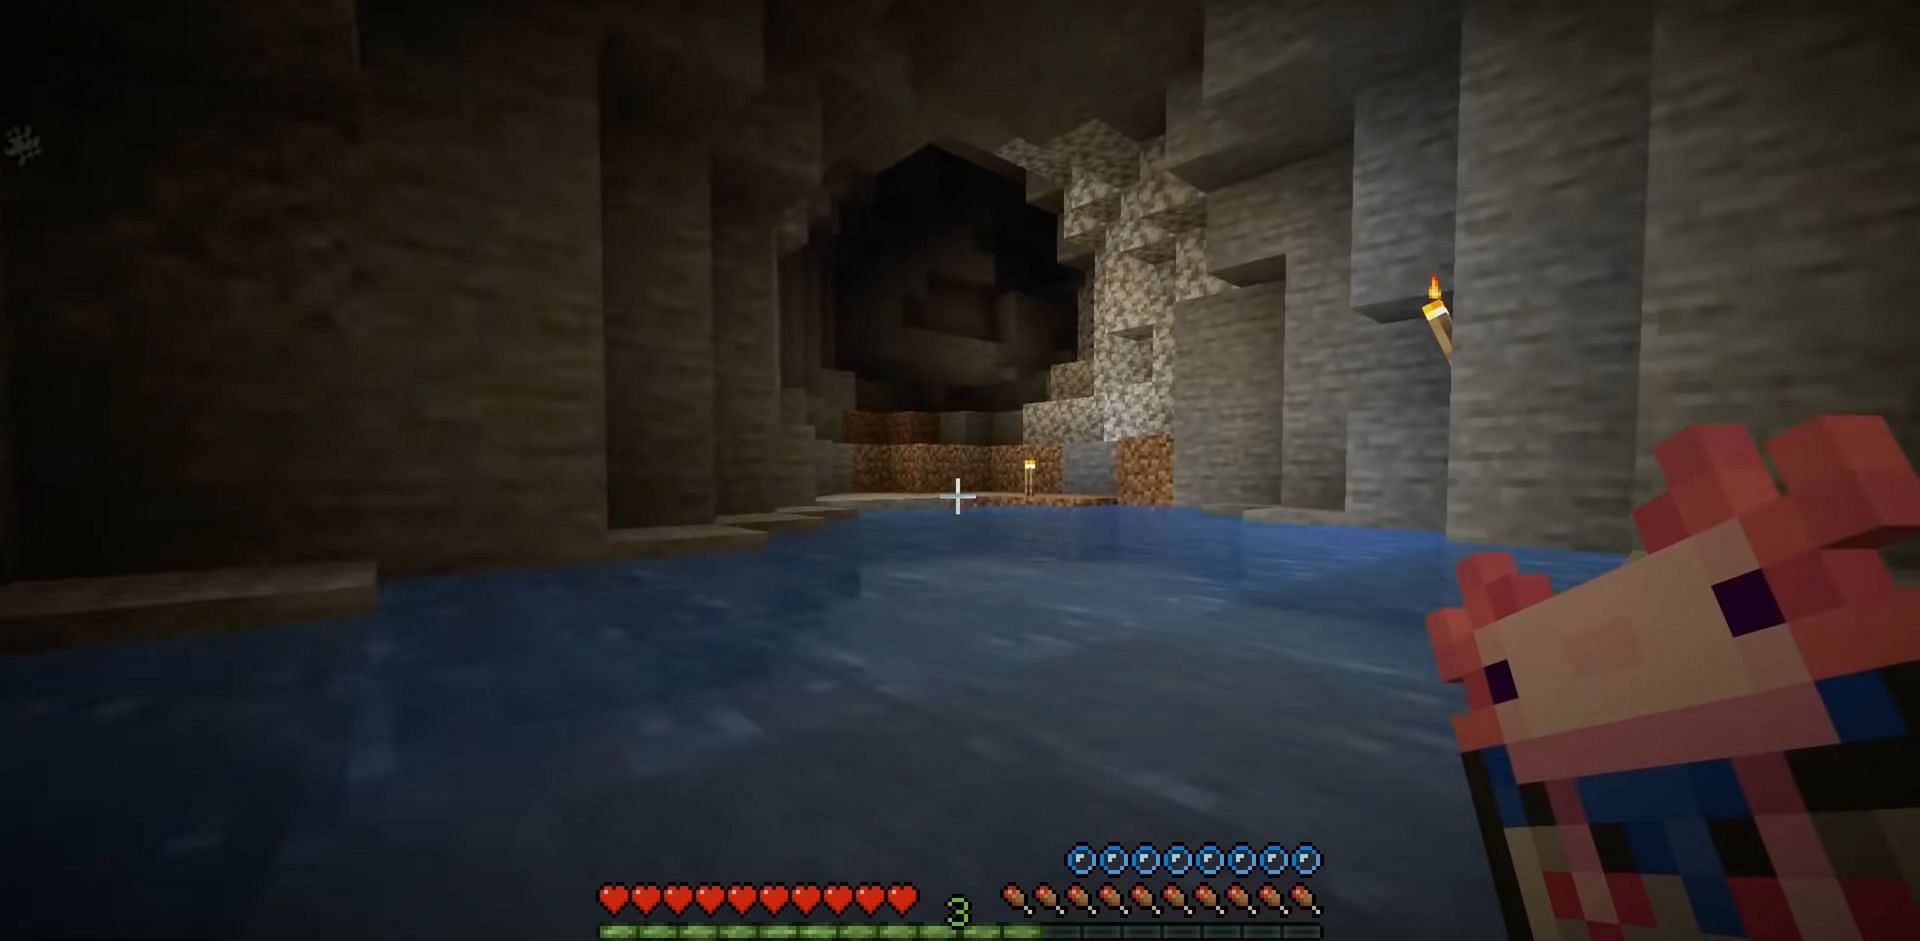 There are many mobs that can help a beginning player during their journey in Minecraft (Image via Minuthu/YouTube)